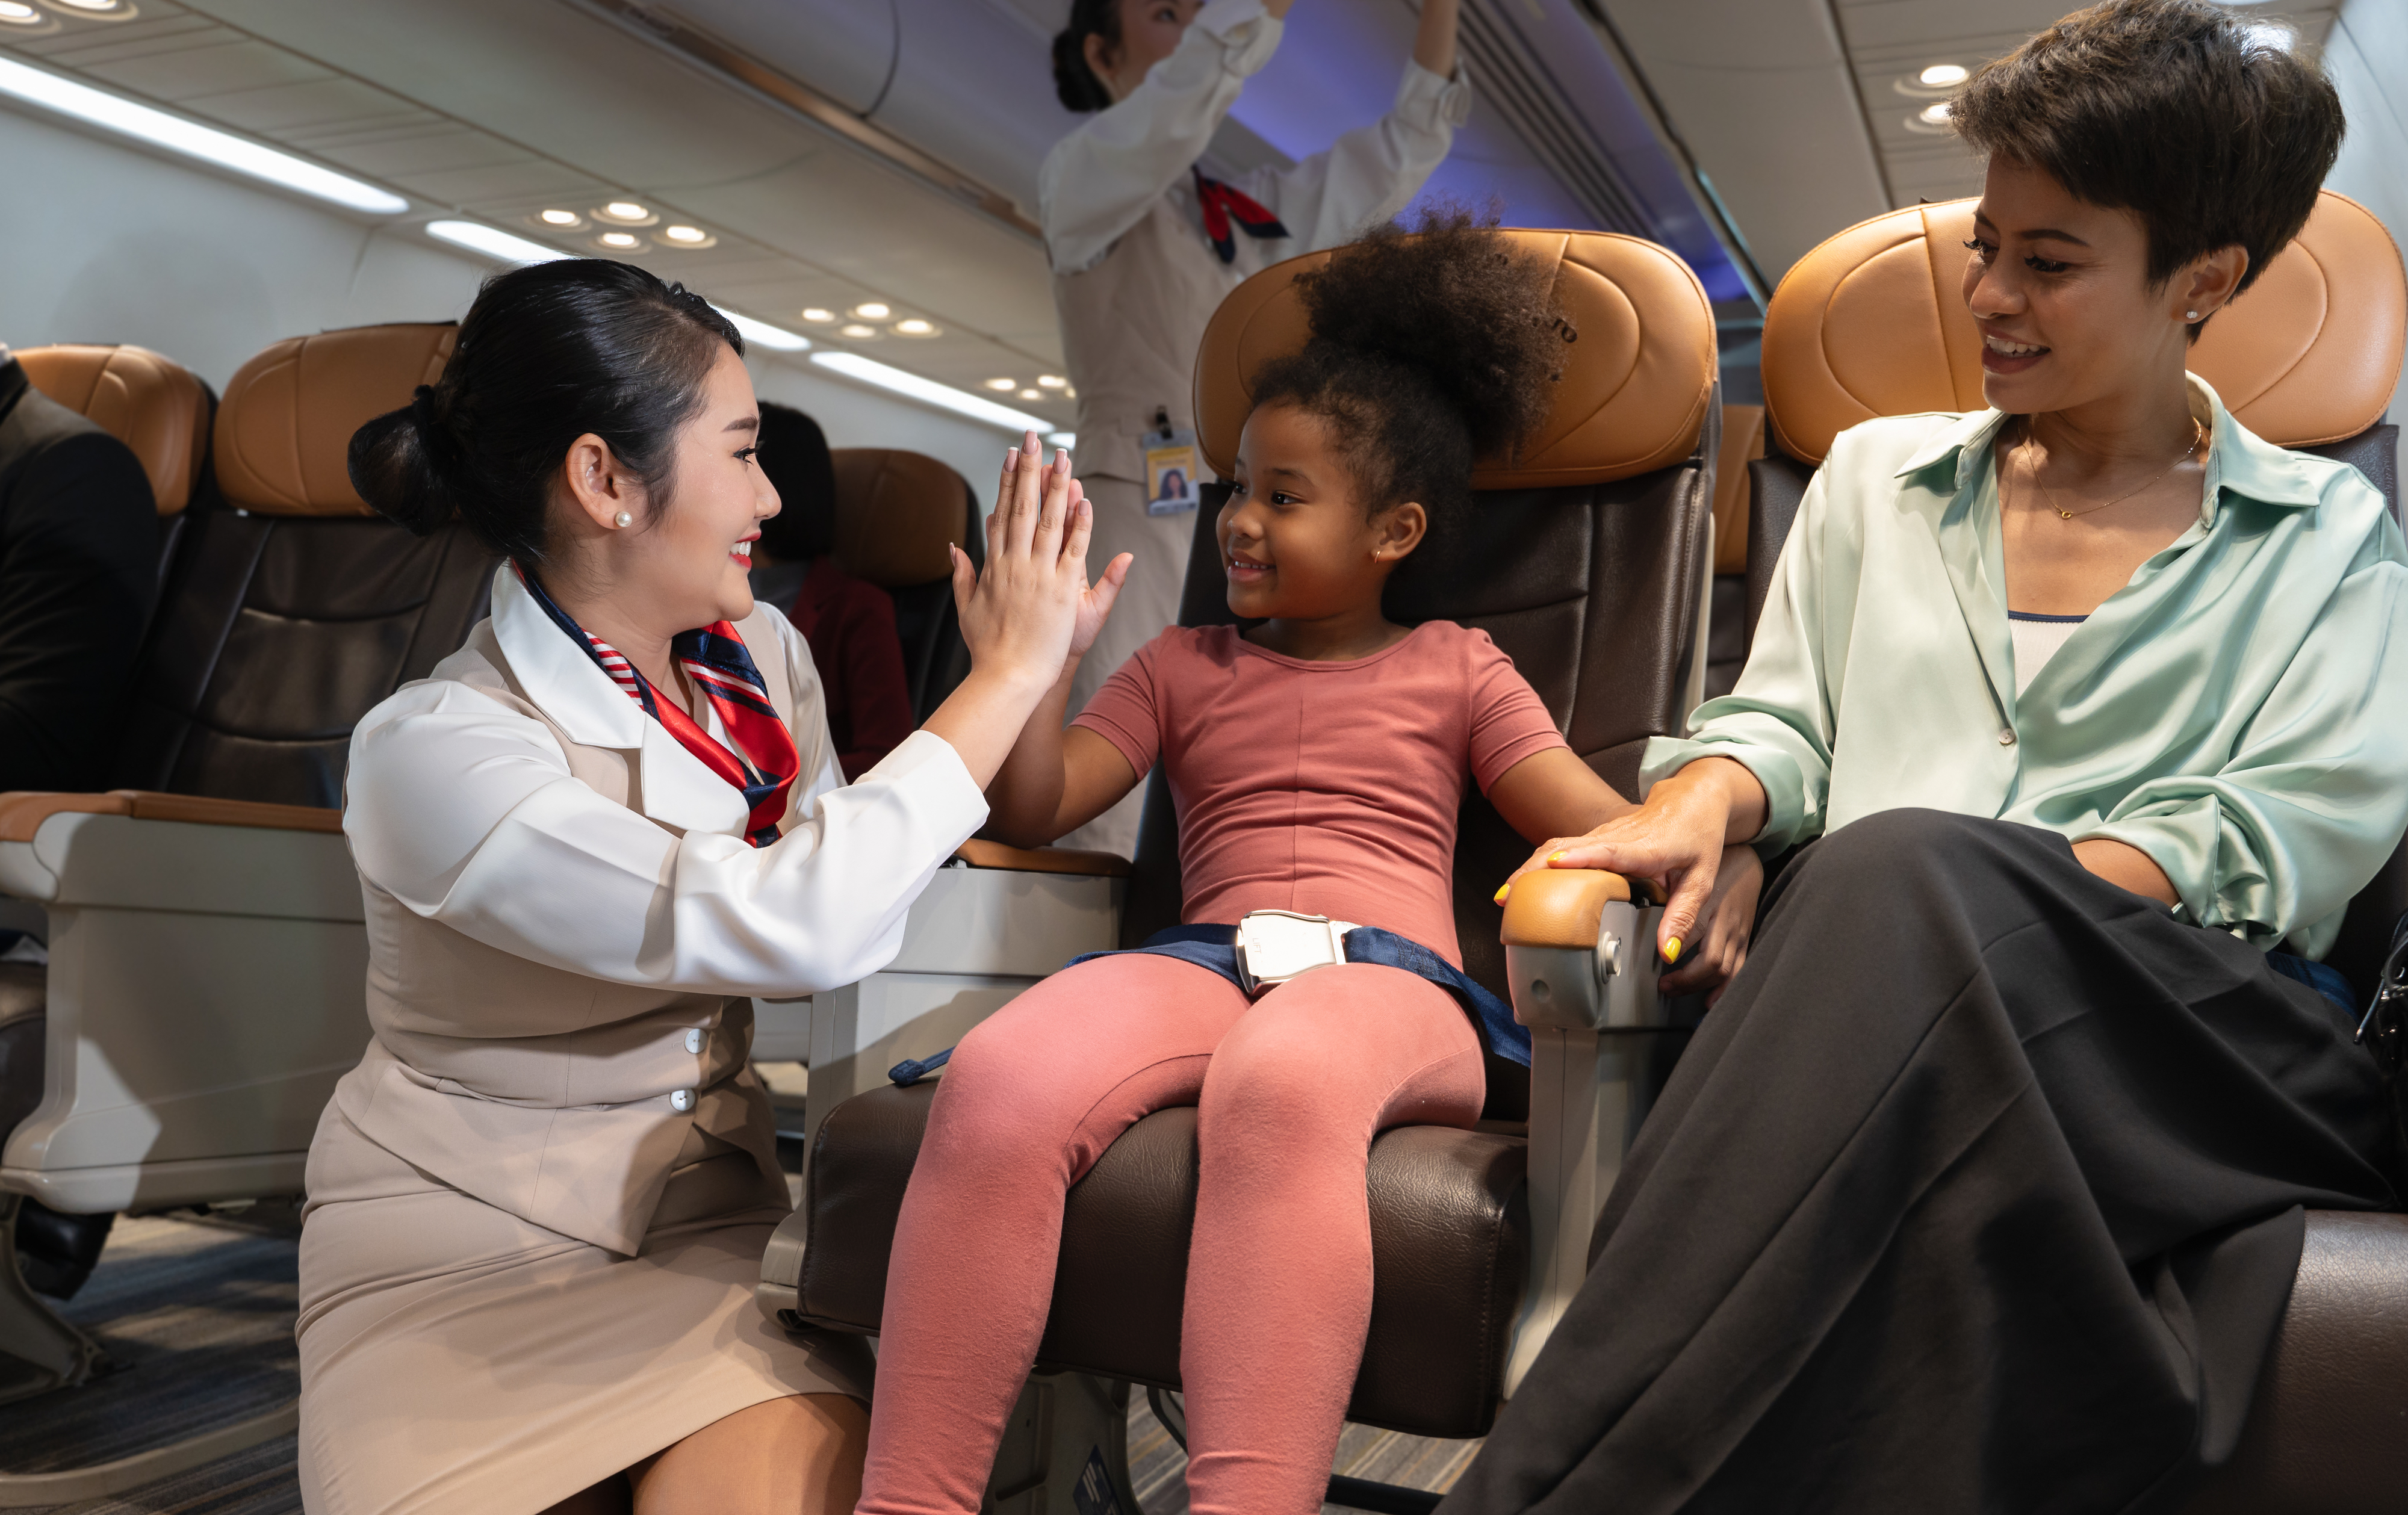 Flight attendant giving high-five to a smiling child seated next to her guardian on a plane